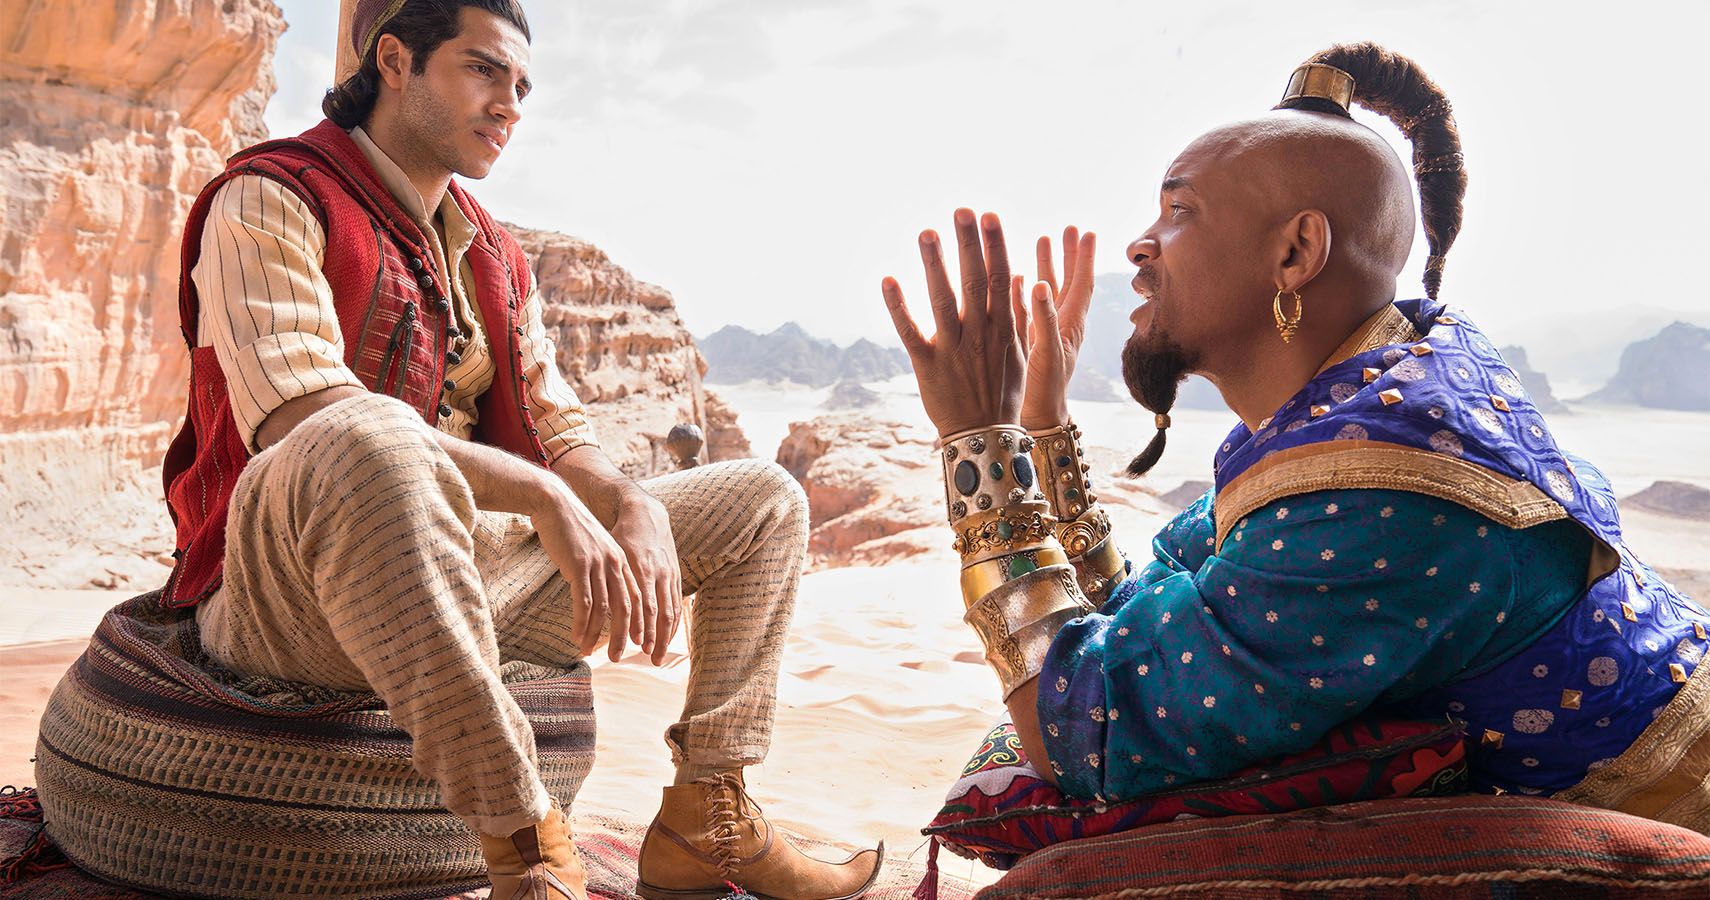 Aladdin 5 Things They Changed In The New 2019 Movie (& 5 Things They Kept The Same)